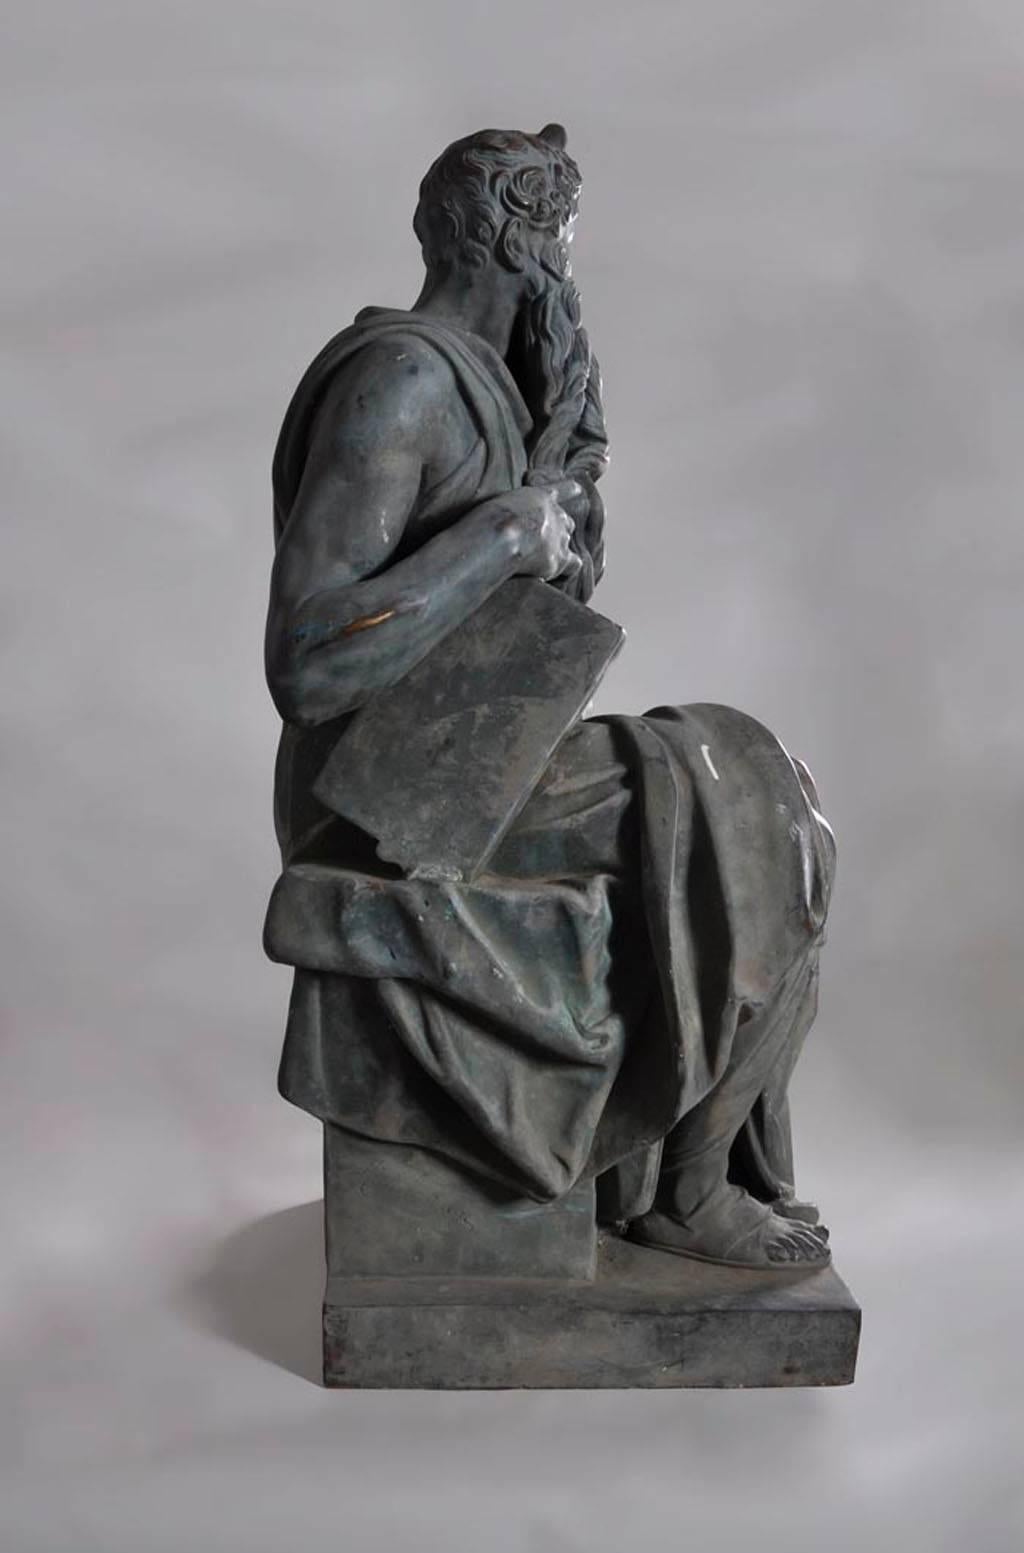 19th Century Statue of Moses, After Michelangelo (1475-1564), Made Out of Bronze